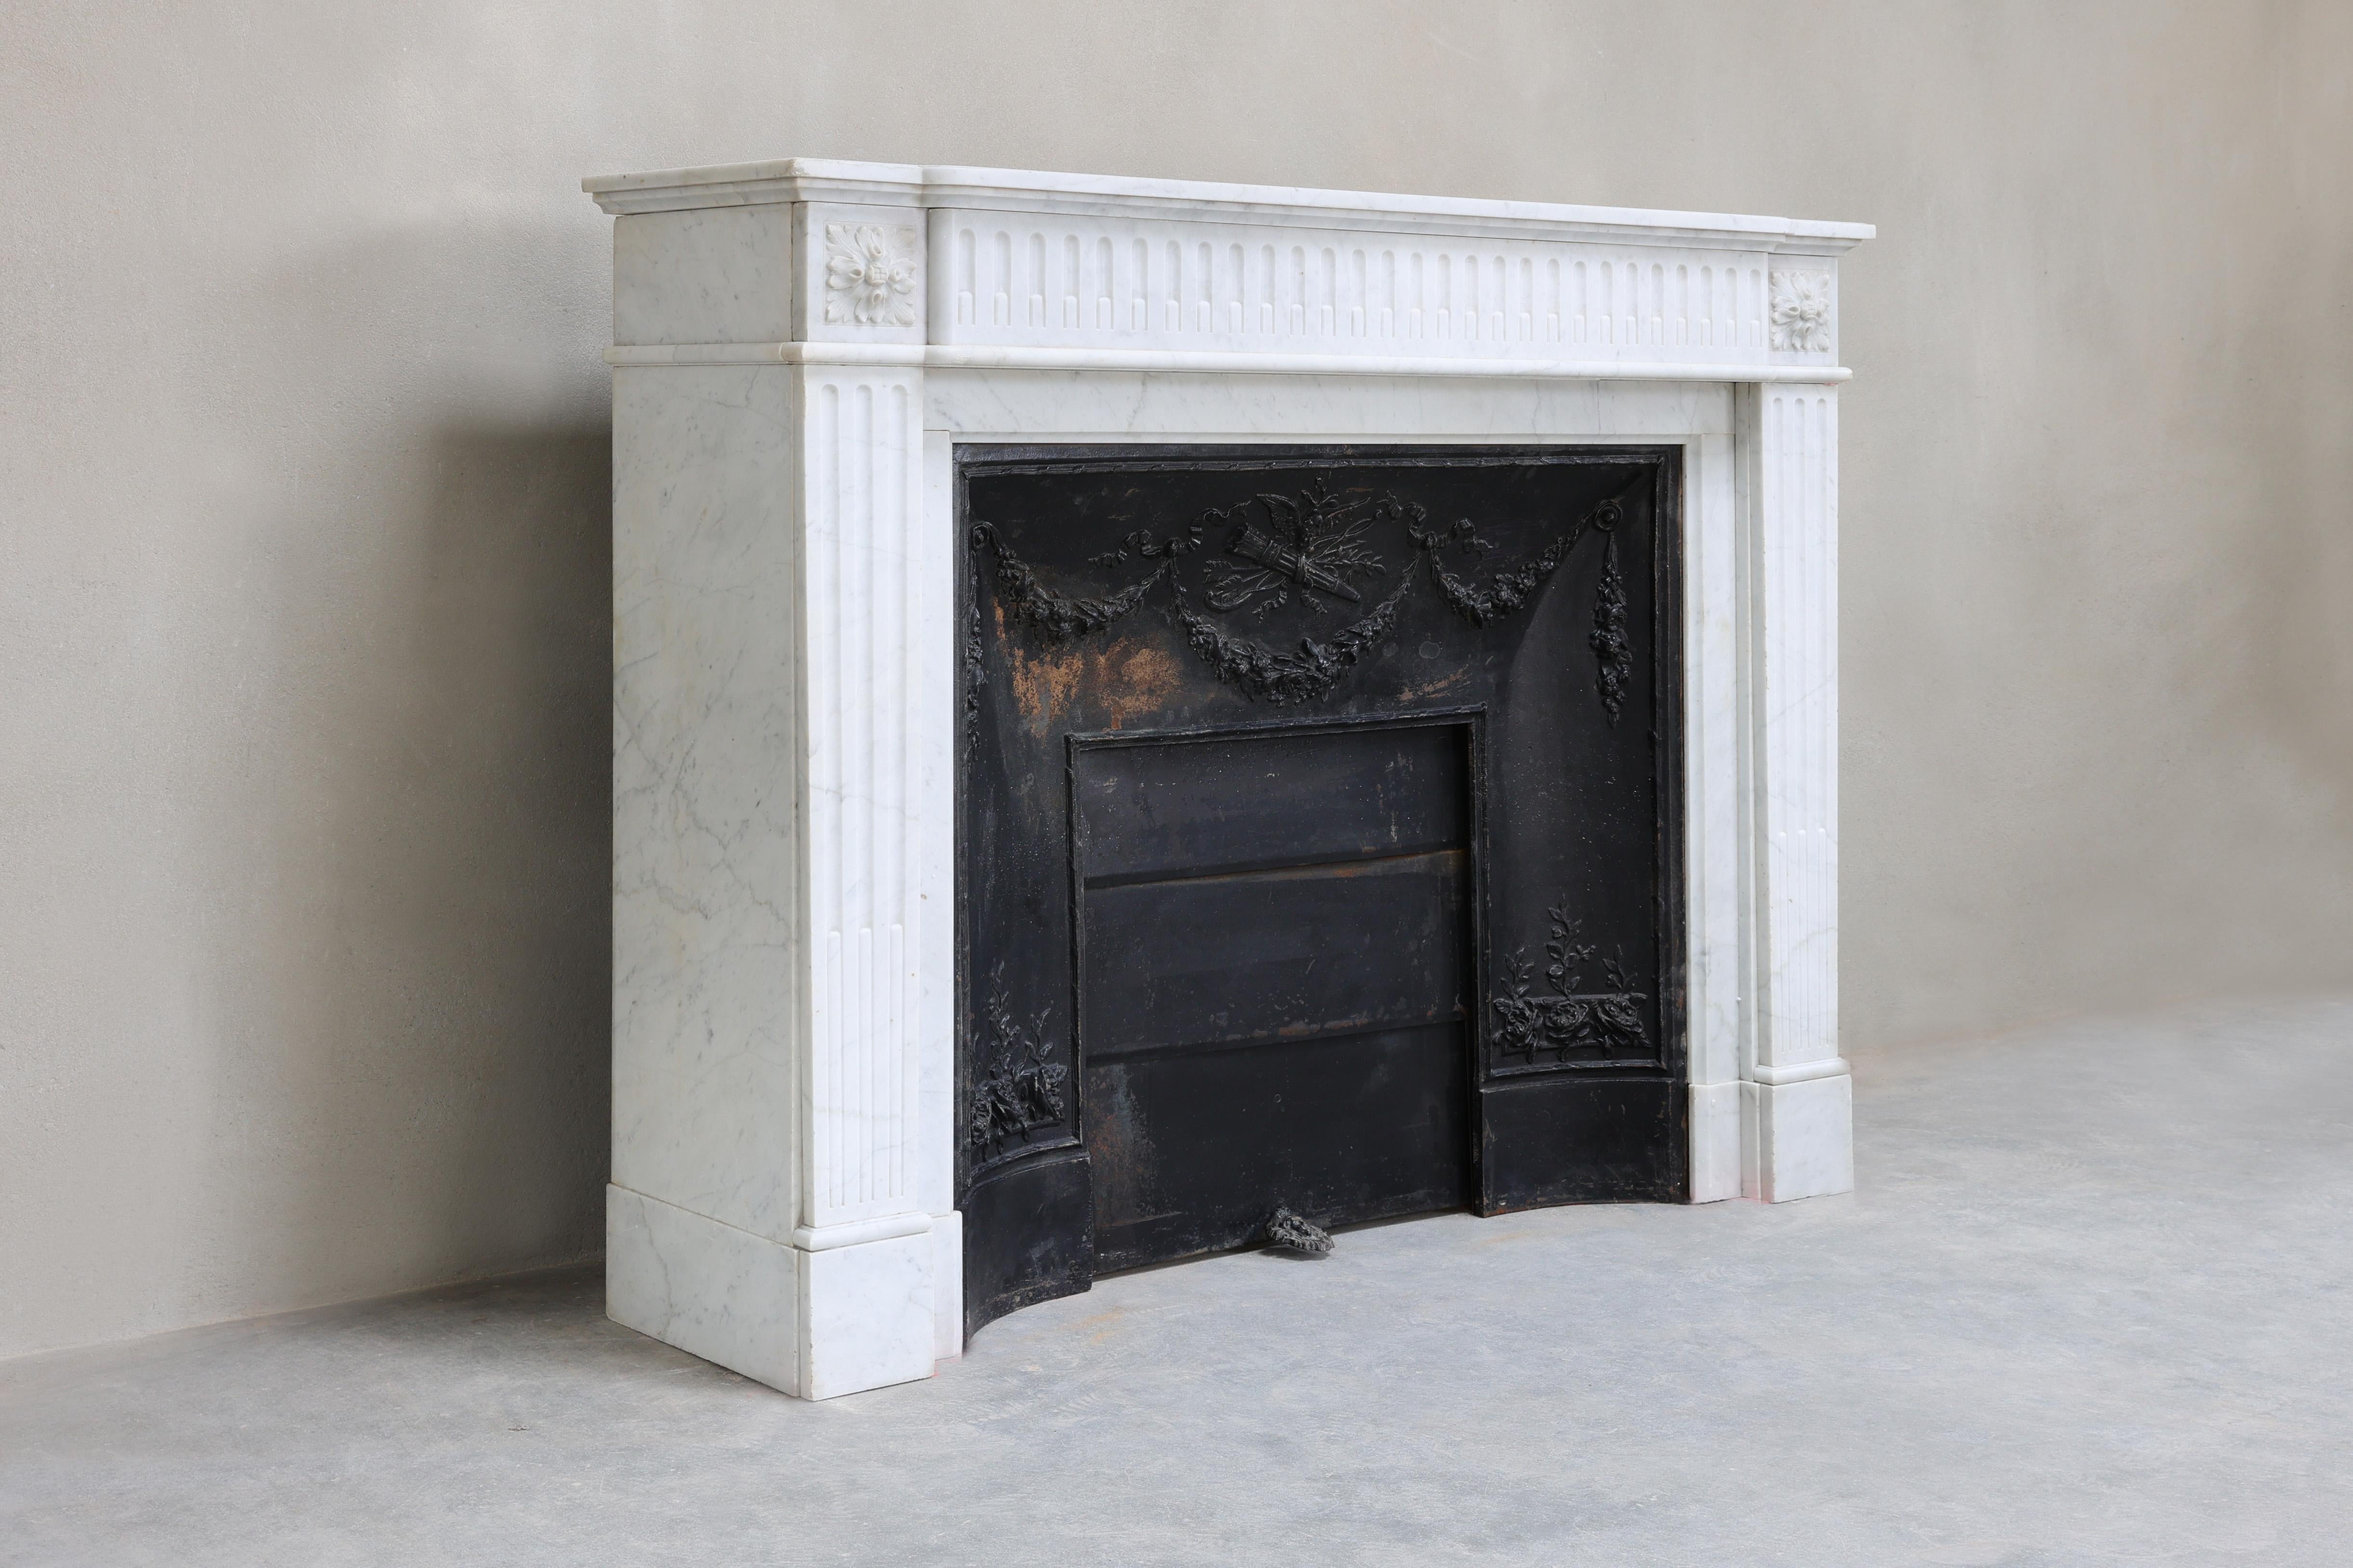 Beautiful Carrara marble fireplace with cast iron insert. This fireplace dates from the 19th century and is in the style of Louis XVI. A beautiful fireplace with fluting on the legs and in the top! This white marble gives calmness and a chic look.